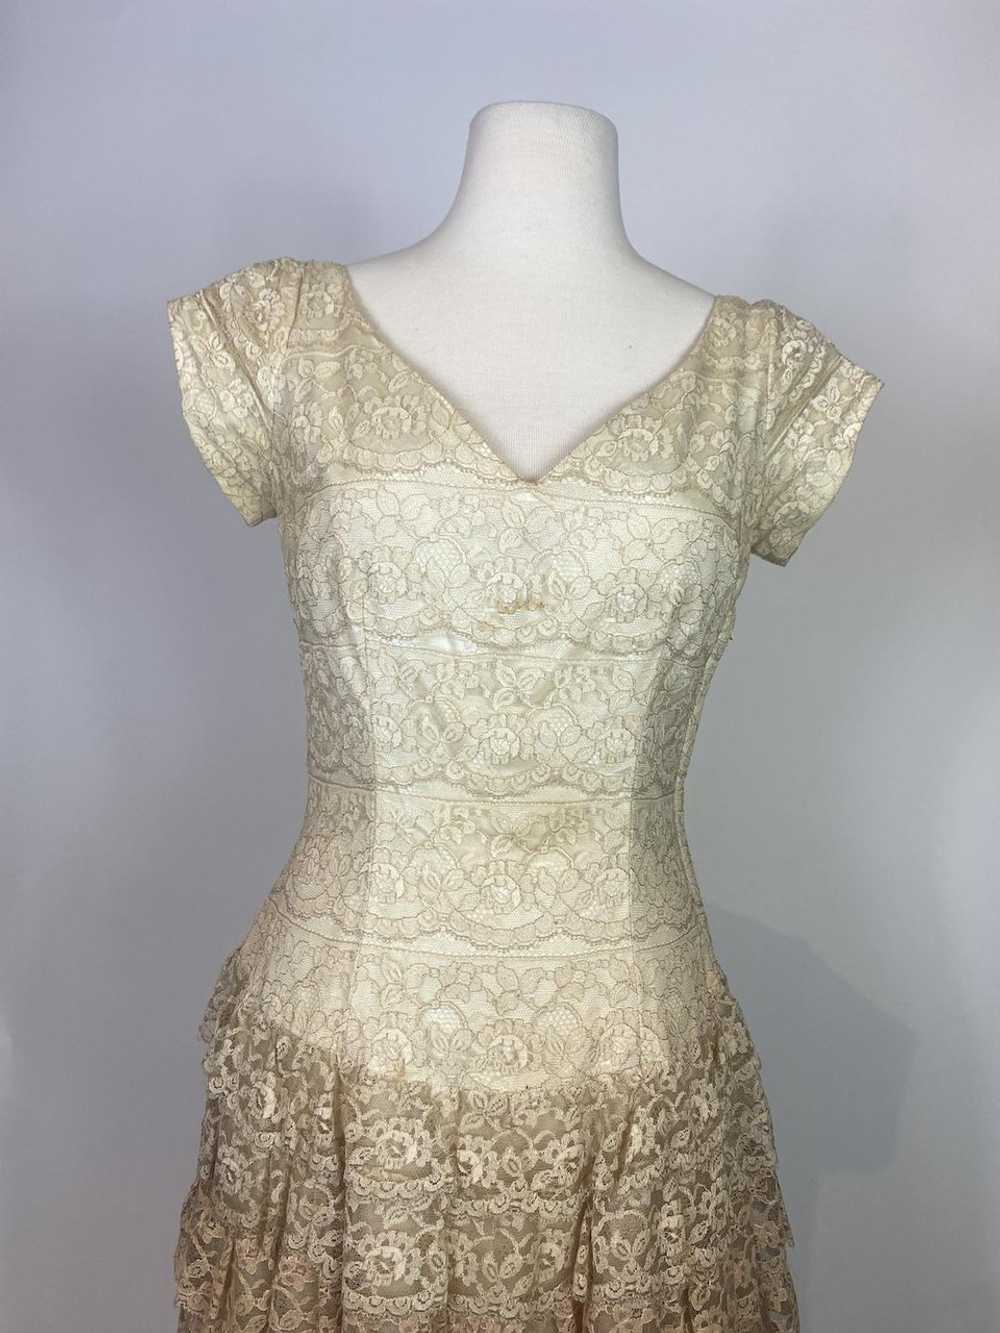 1950s Tiered Ombre Lace Swing Dress - image 2